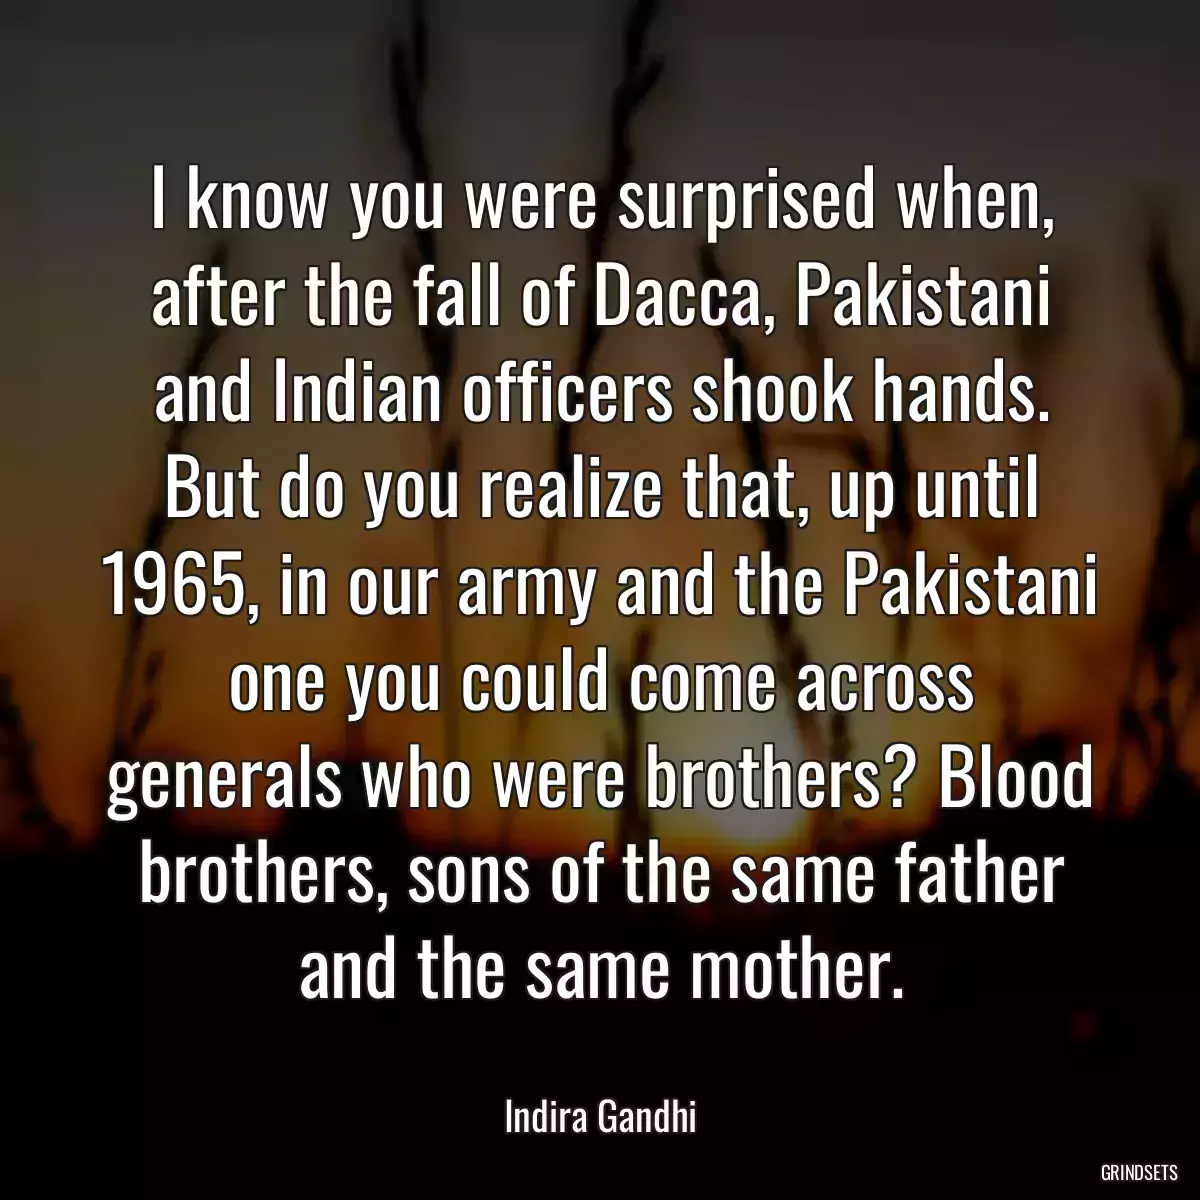 I know you were surprised when, after the fall of Dacca, Pakistani and Indian officers shook hands. But do you realize that, up until 1965, in our army and the Pakistani one you could come across generals who were brothers? Blood brothers, sons of the same father and the same mother.